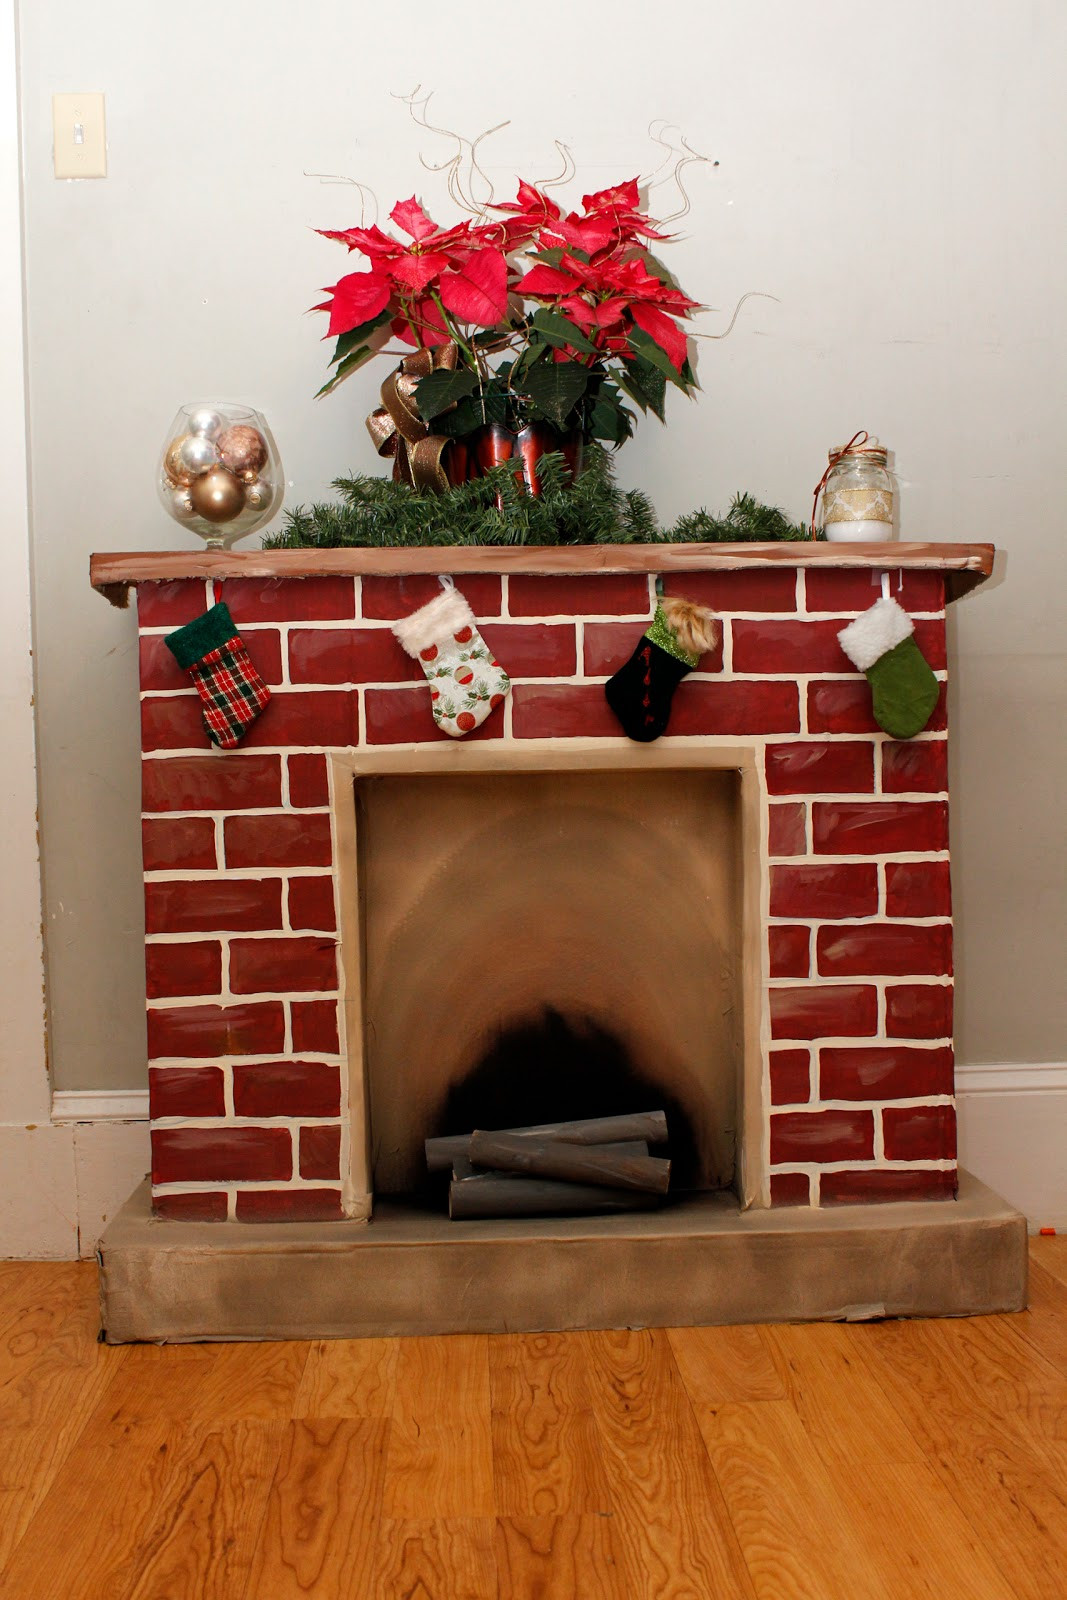 Fake Christmas Fireplace
 365 Days to Simplicity Chestnuts roasting on an cardboard